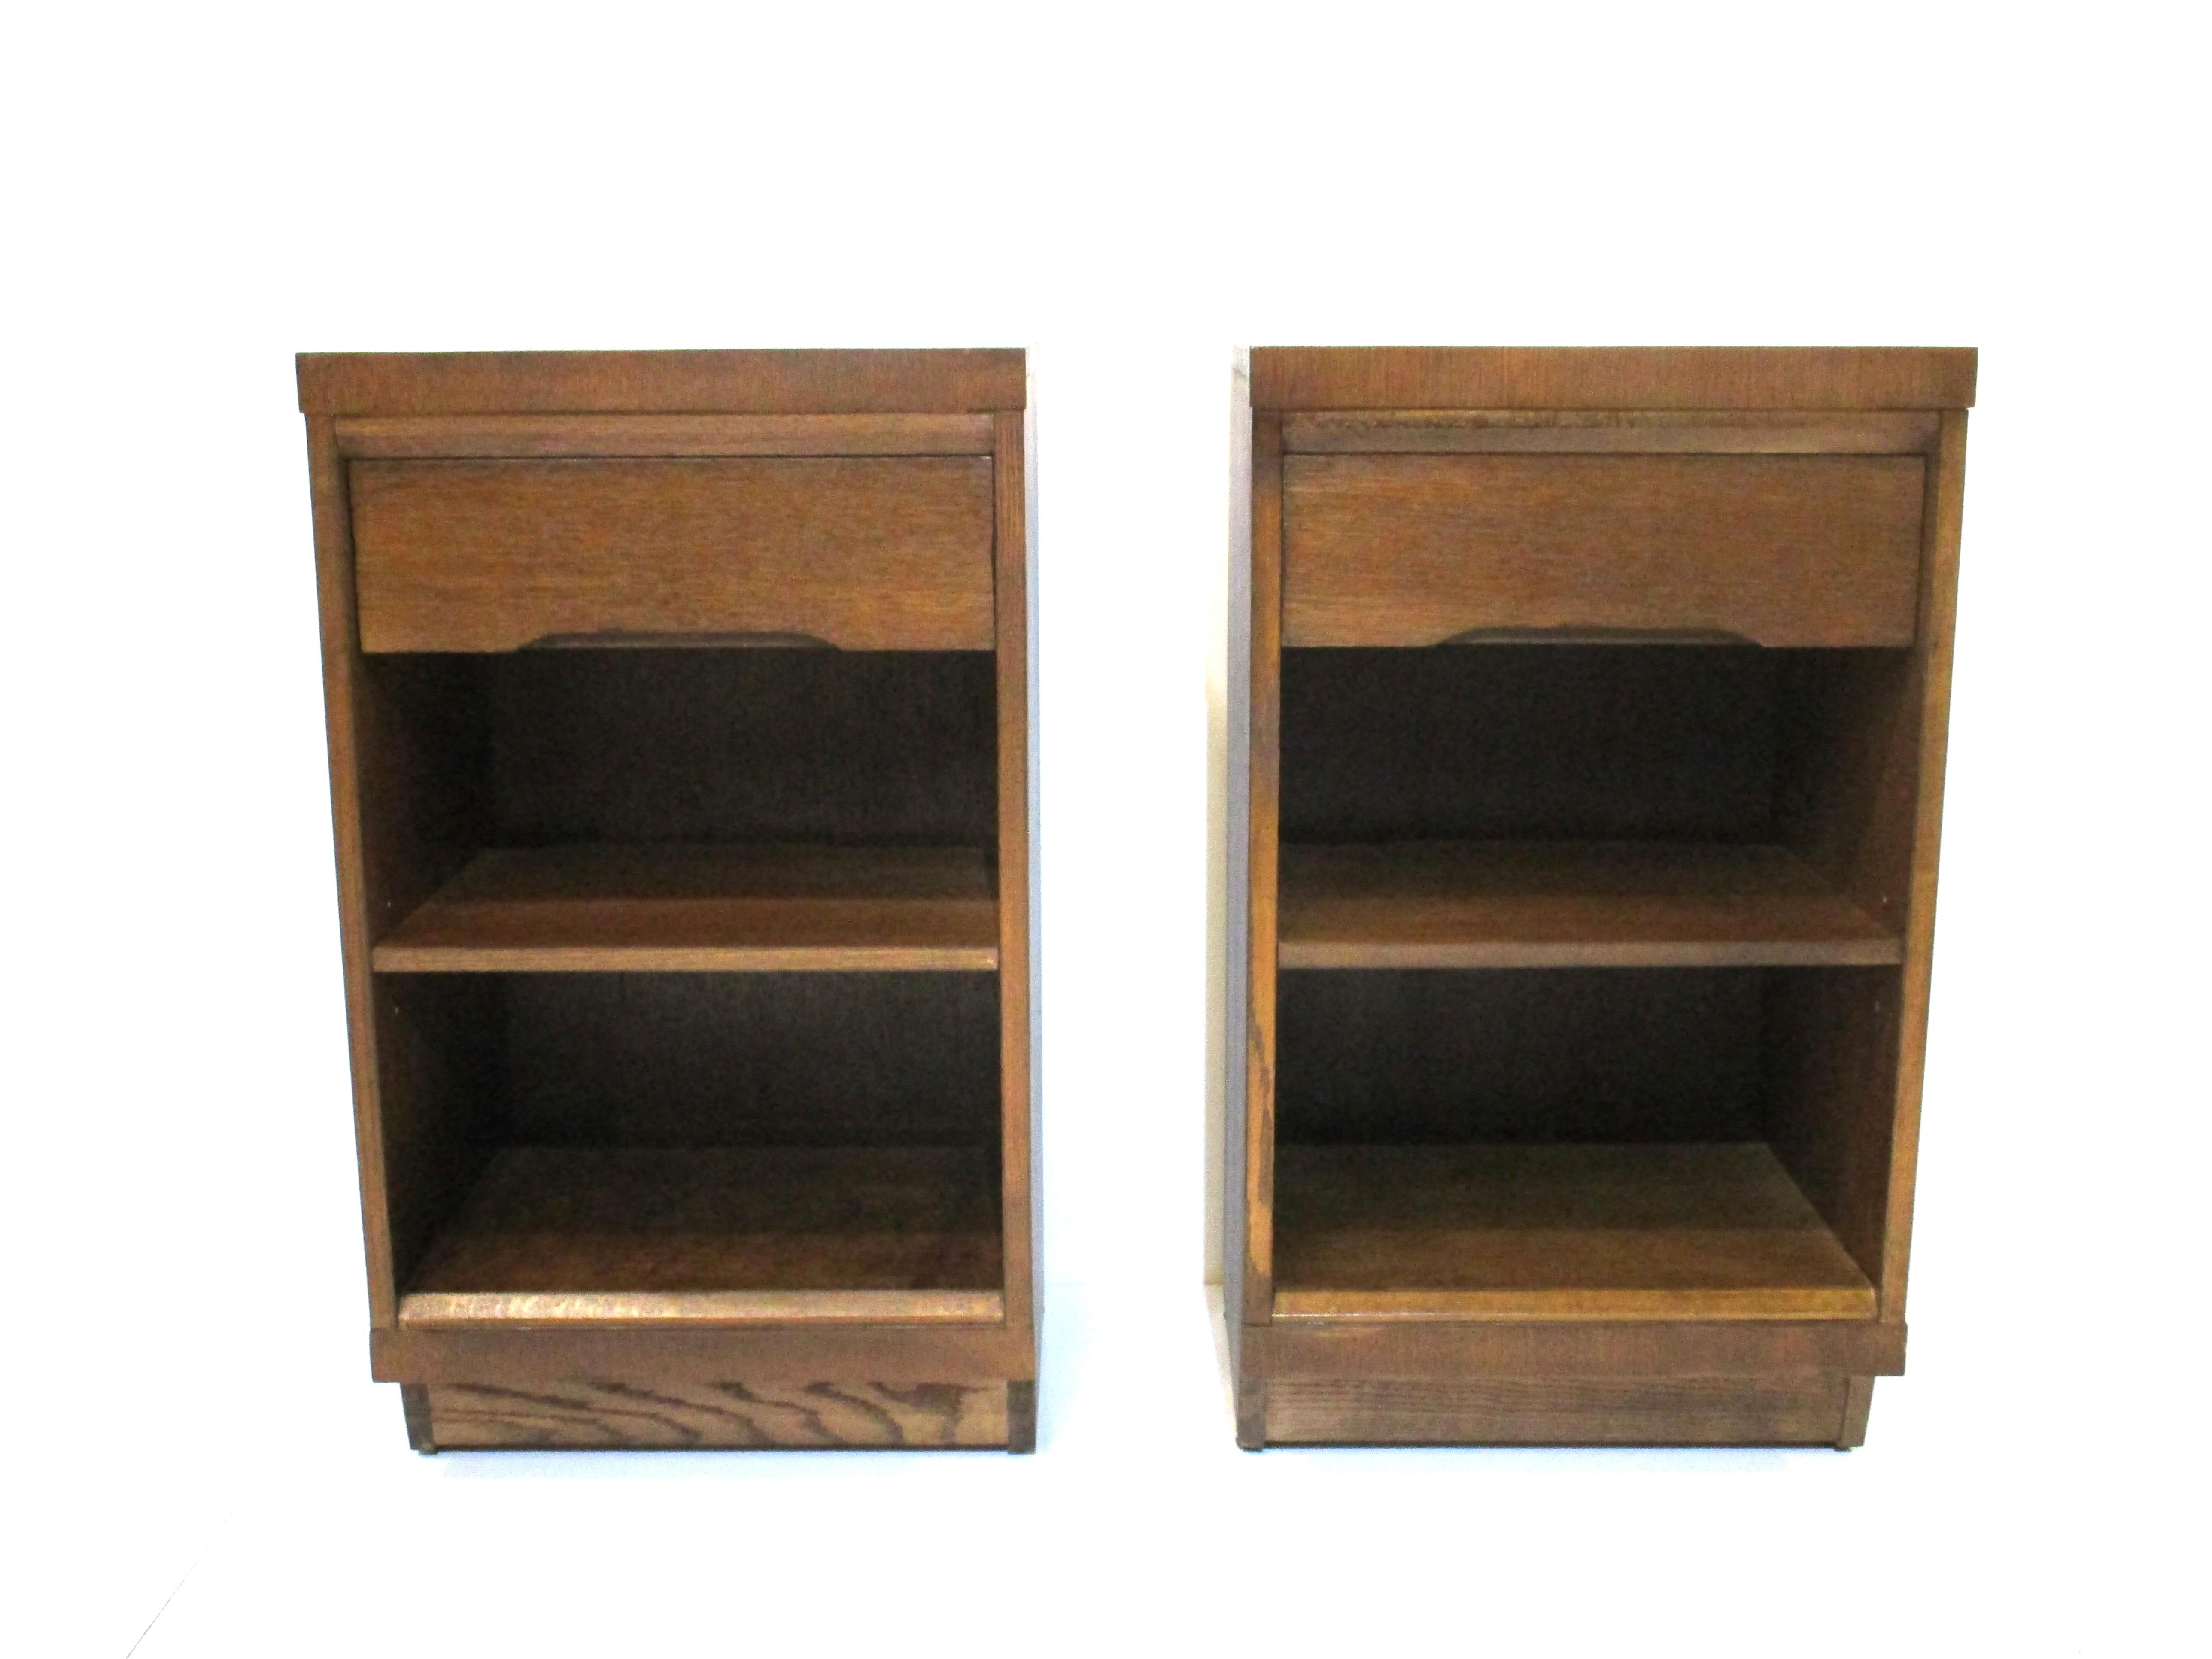 A pair of oak nightstands in a medium dark tone with upper drawer and an adjustable shelve to the mid section. These are in a higher size perfect for today's modern bedding .